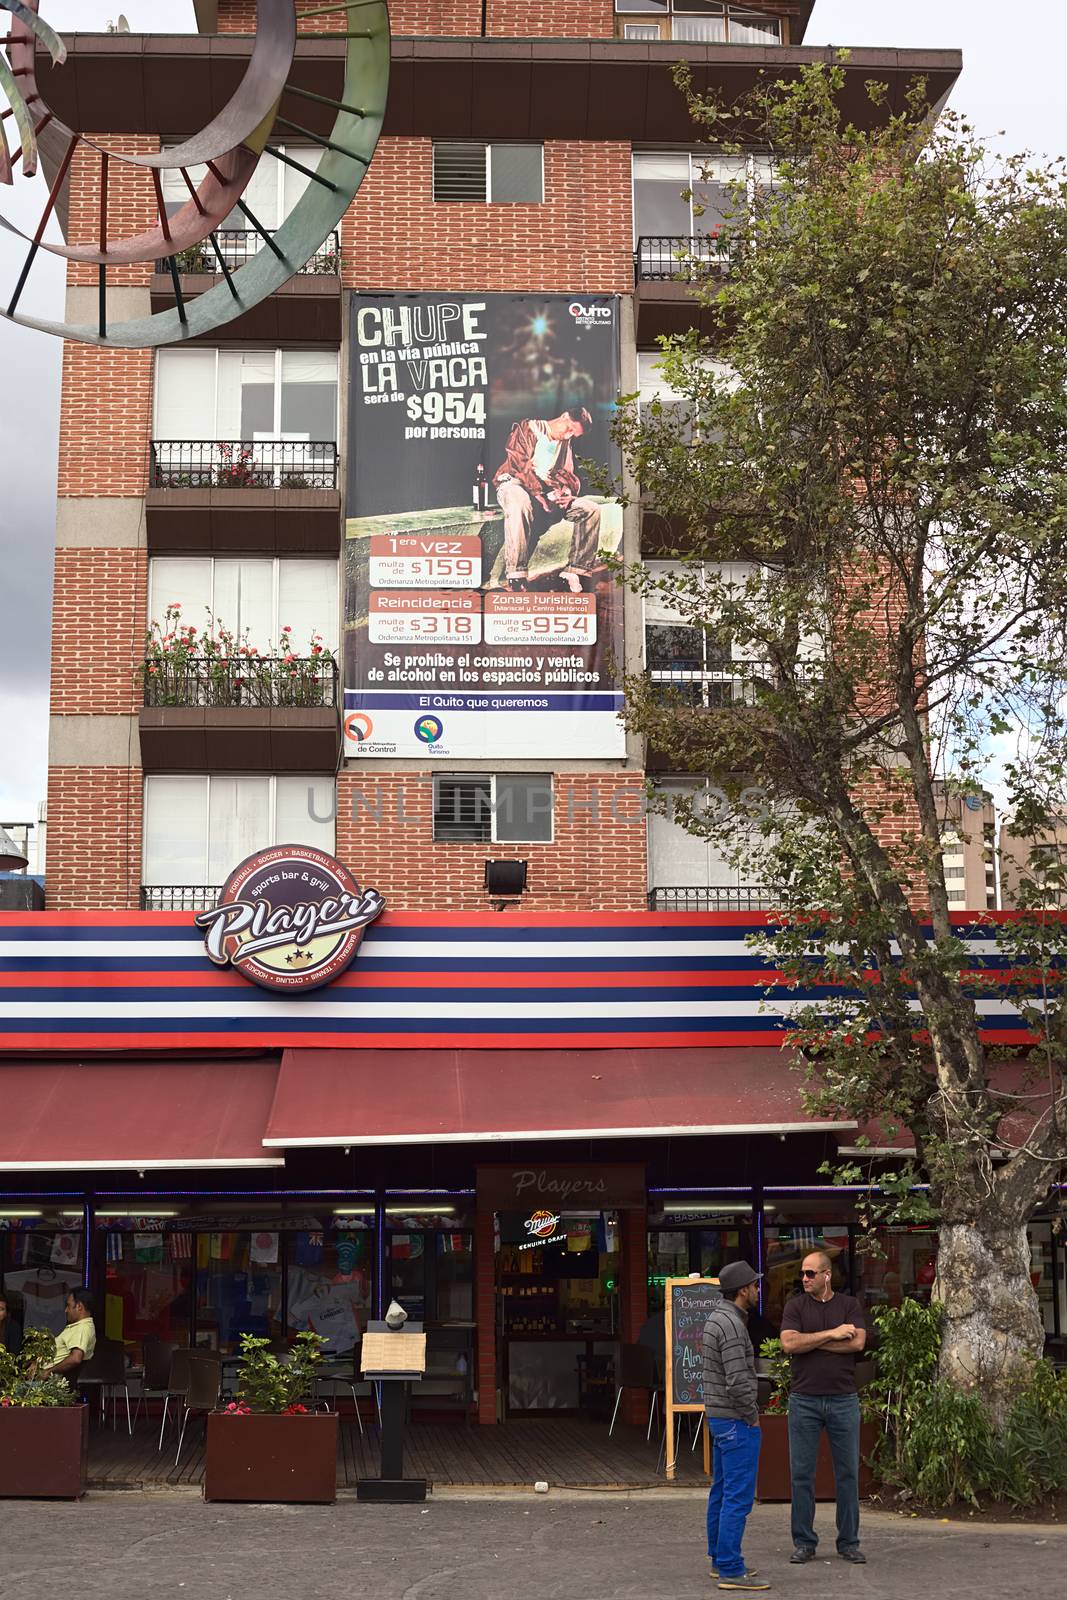 QUITO, ECUADOR - AUGUST 6, 2014: Players Sports Bar and Grill on Plaza Foch in La Mariscal on August 6, 2014 in Quito, Ecuador. The big sign says that there is a fine of 954 USD for drinking in public areas in the tourist districts.